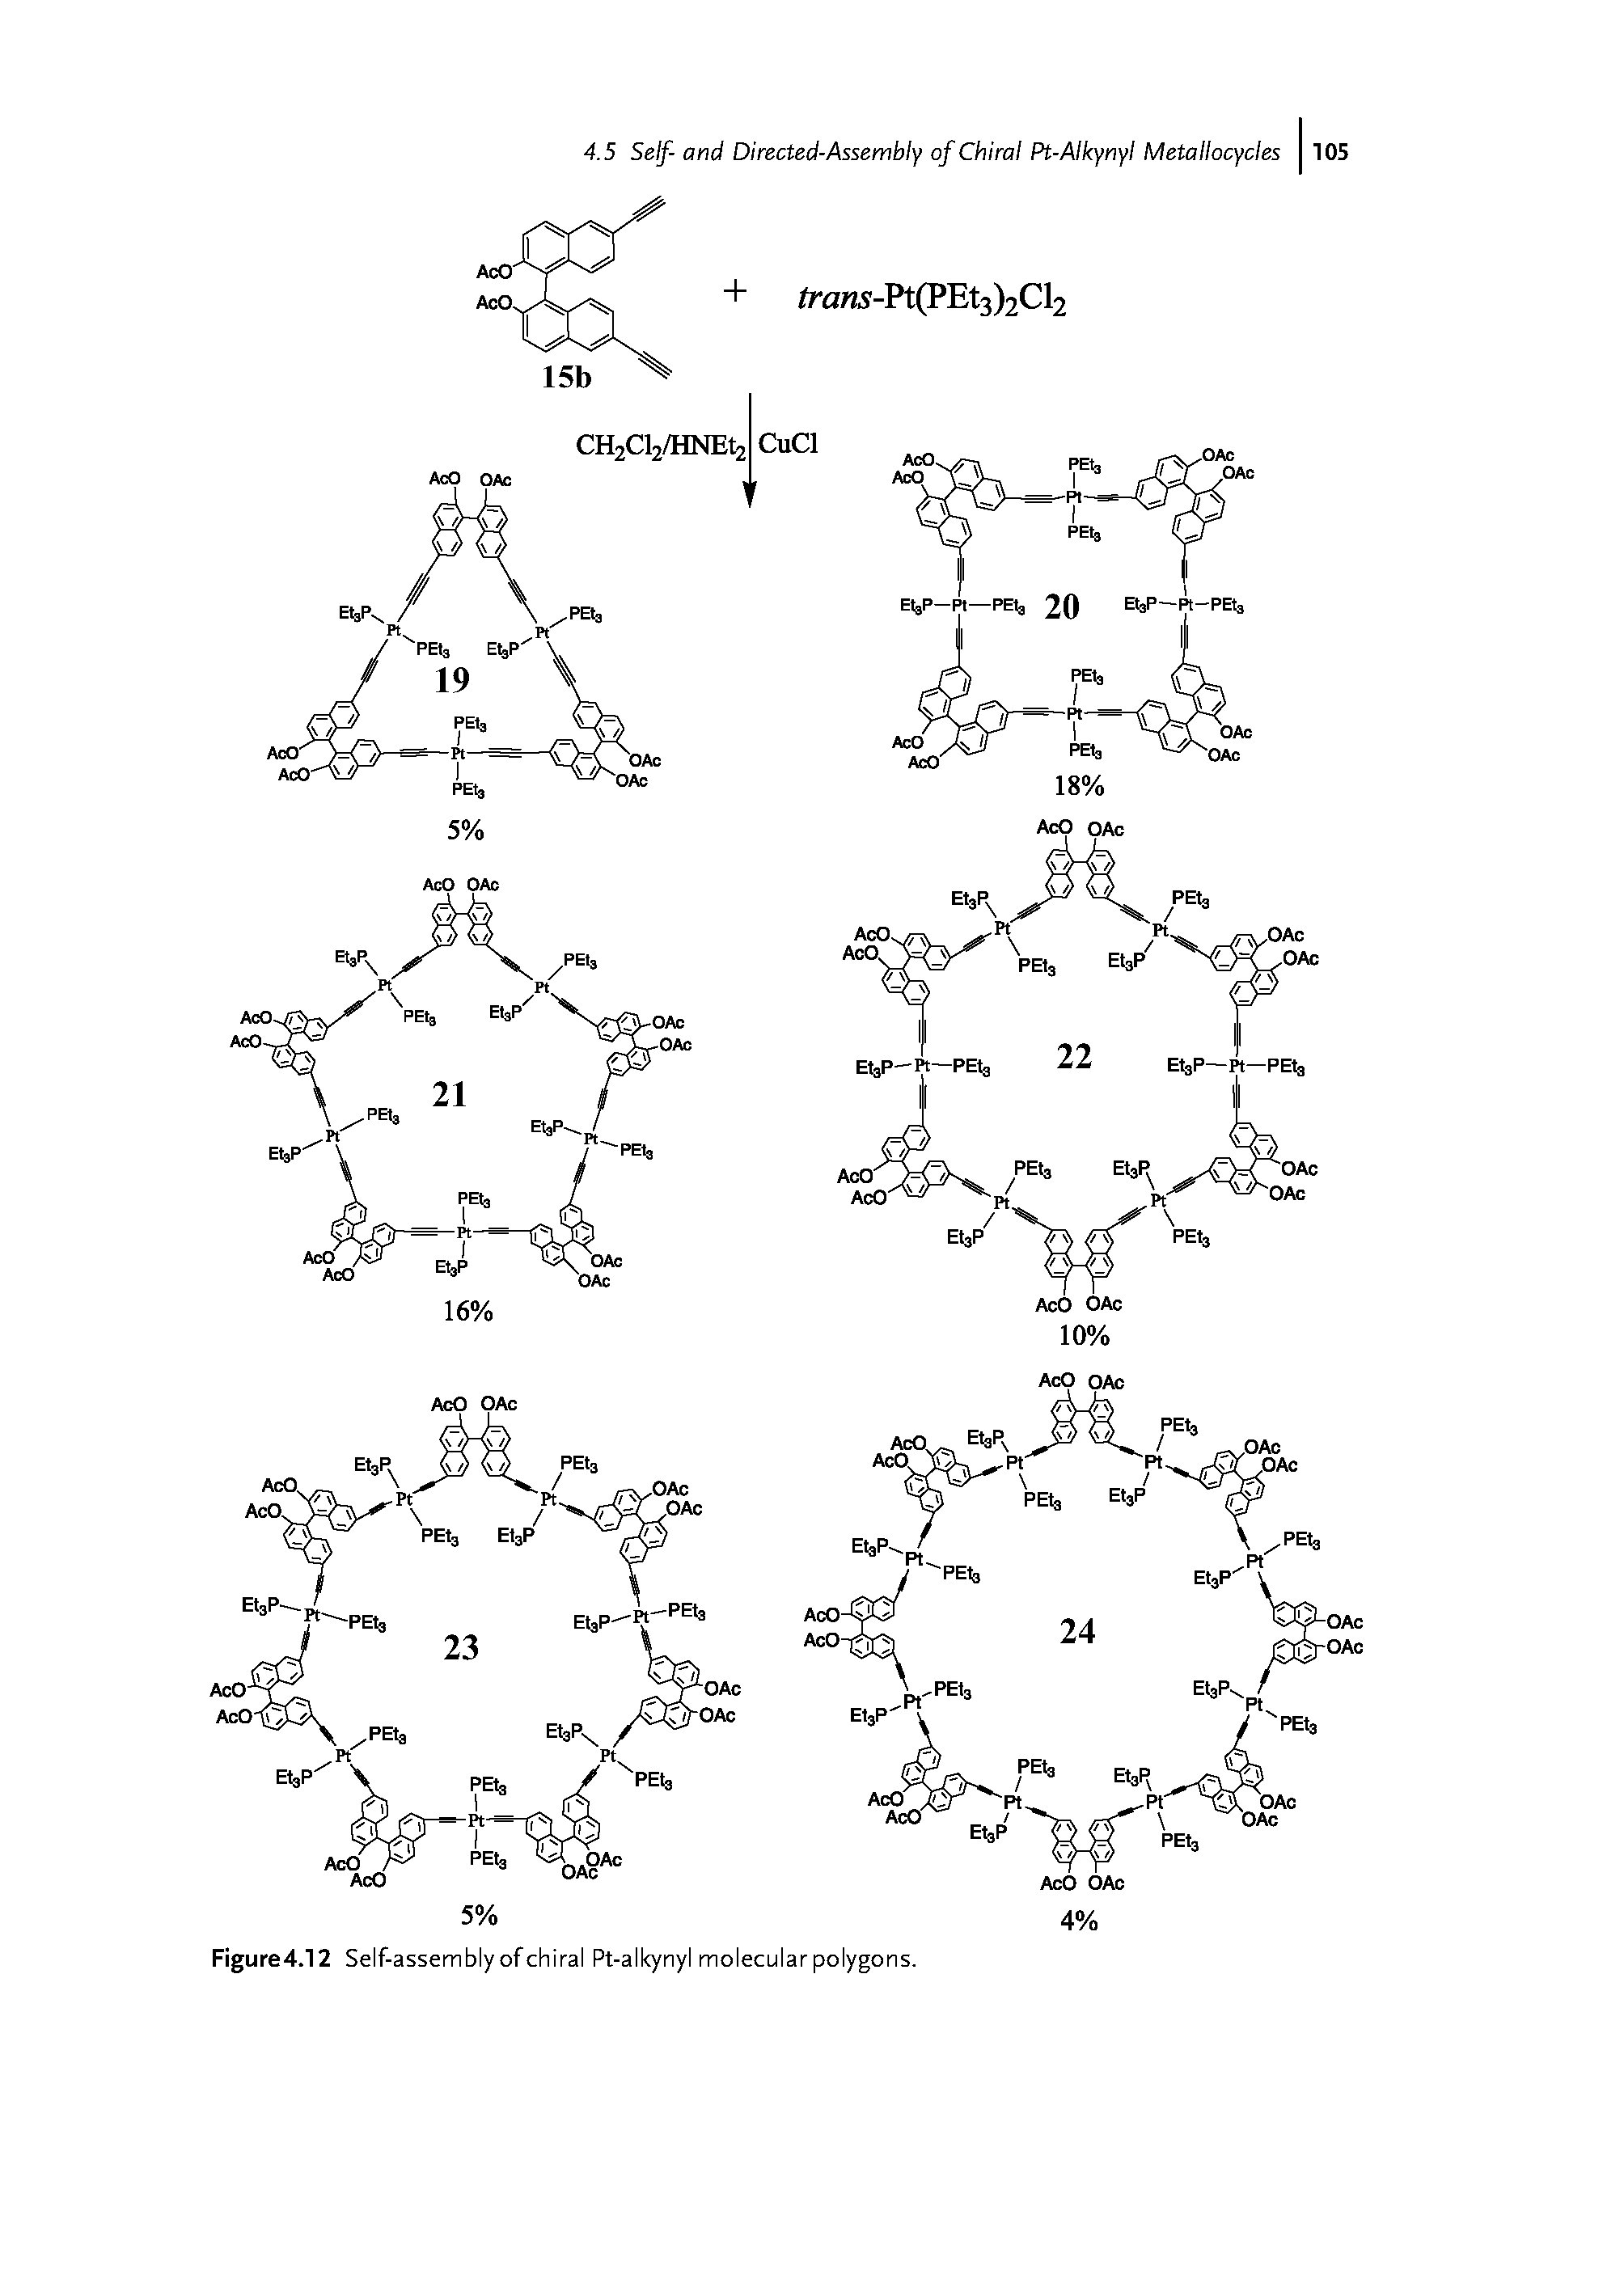 Figure4.12 Self-assembly of chiral Pt-alkynyl molecular polygons.